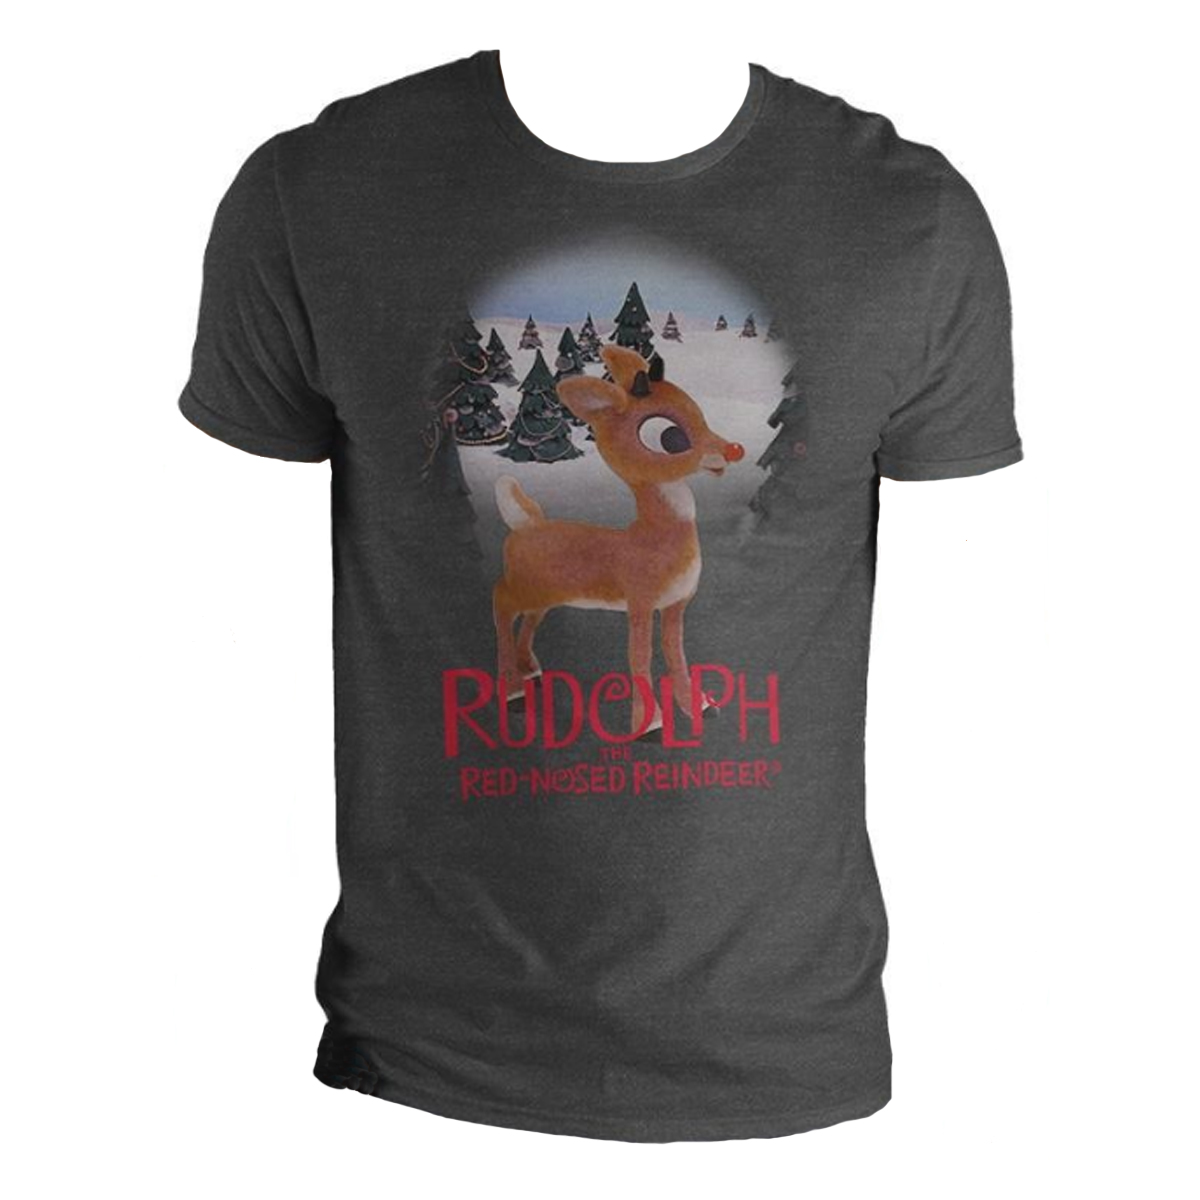 rudolph the red nosed reindeer shirt